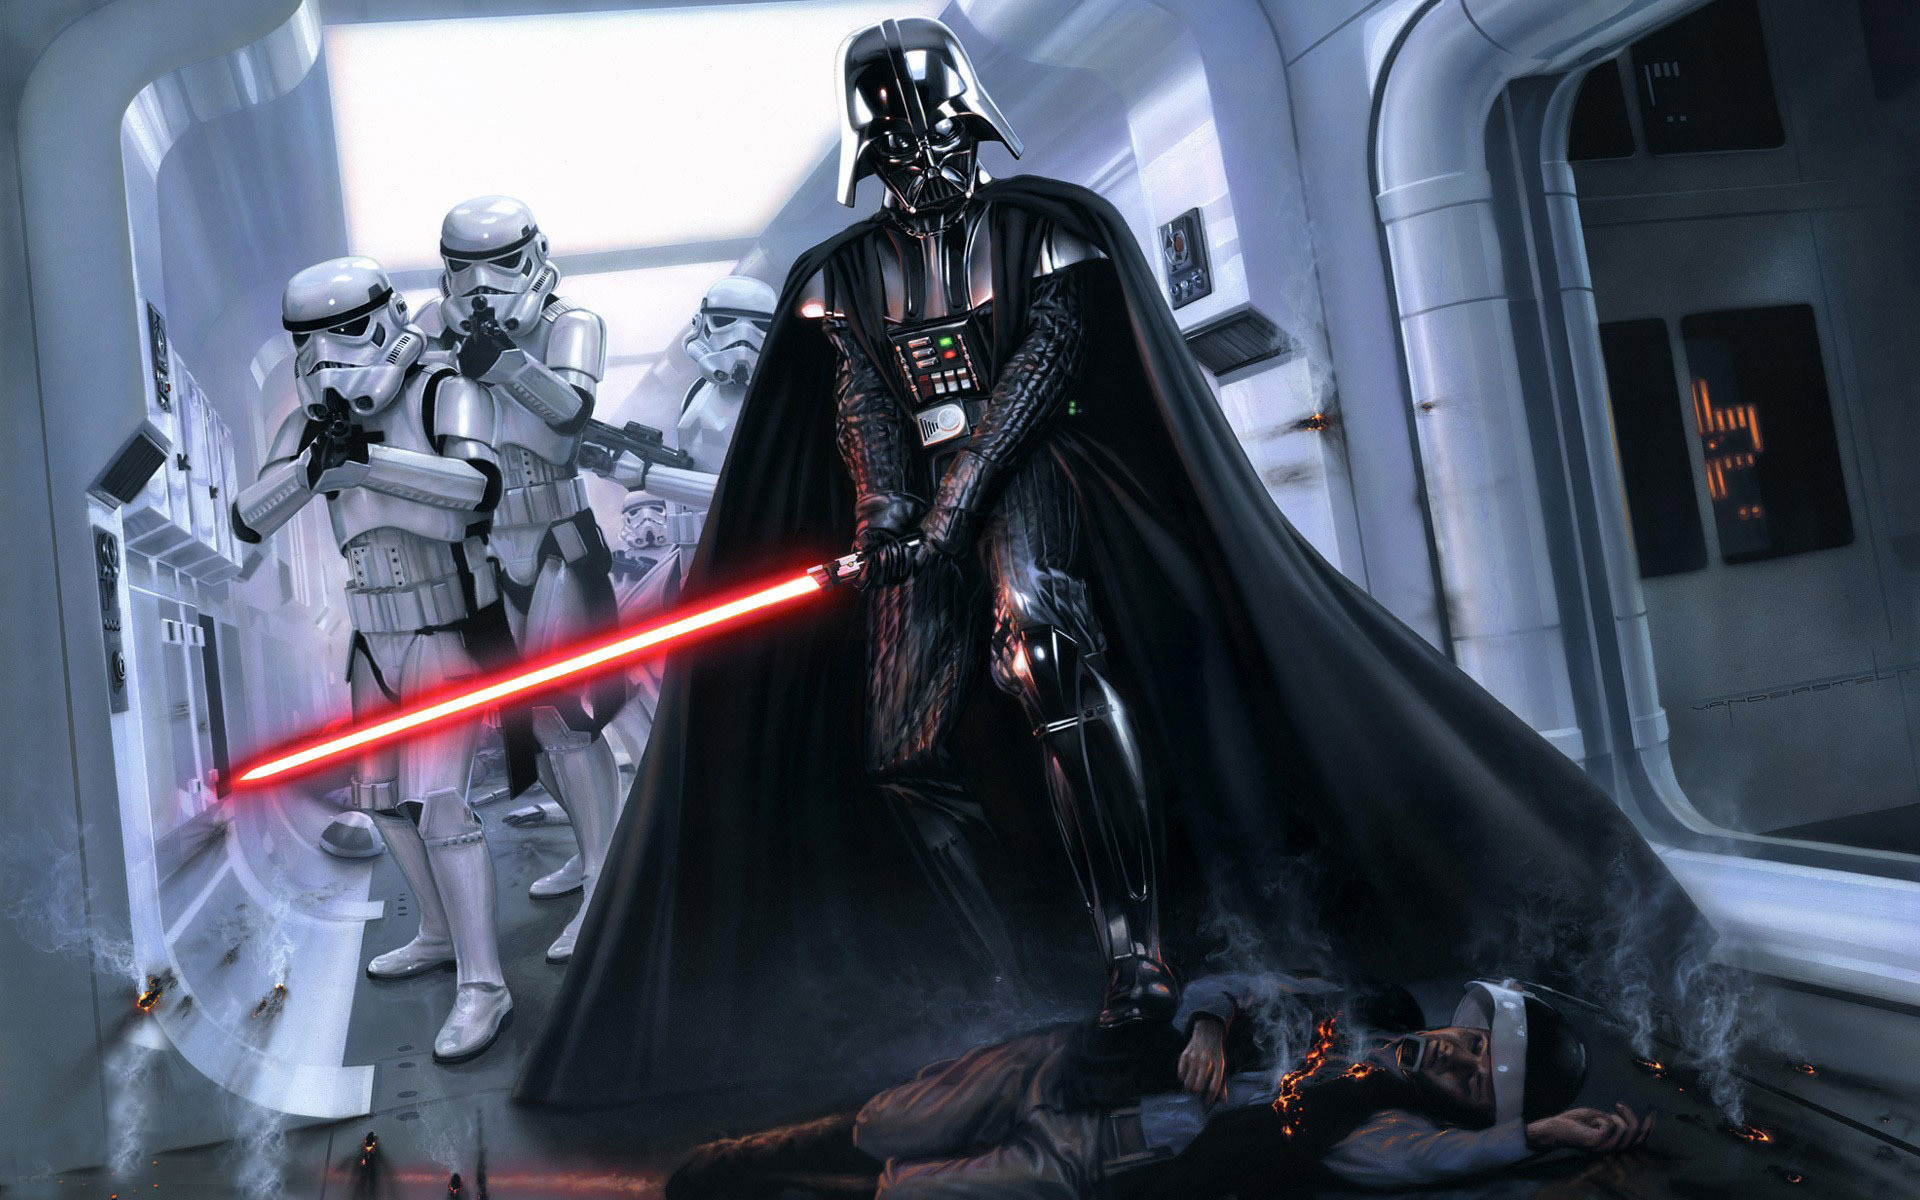 Darth Vader: Anakin Skywalker, Turned to the dark side of the Force. 1920x1200 HD Wallpaper.